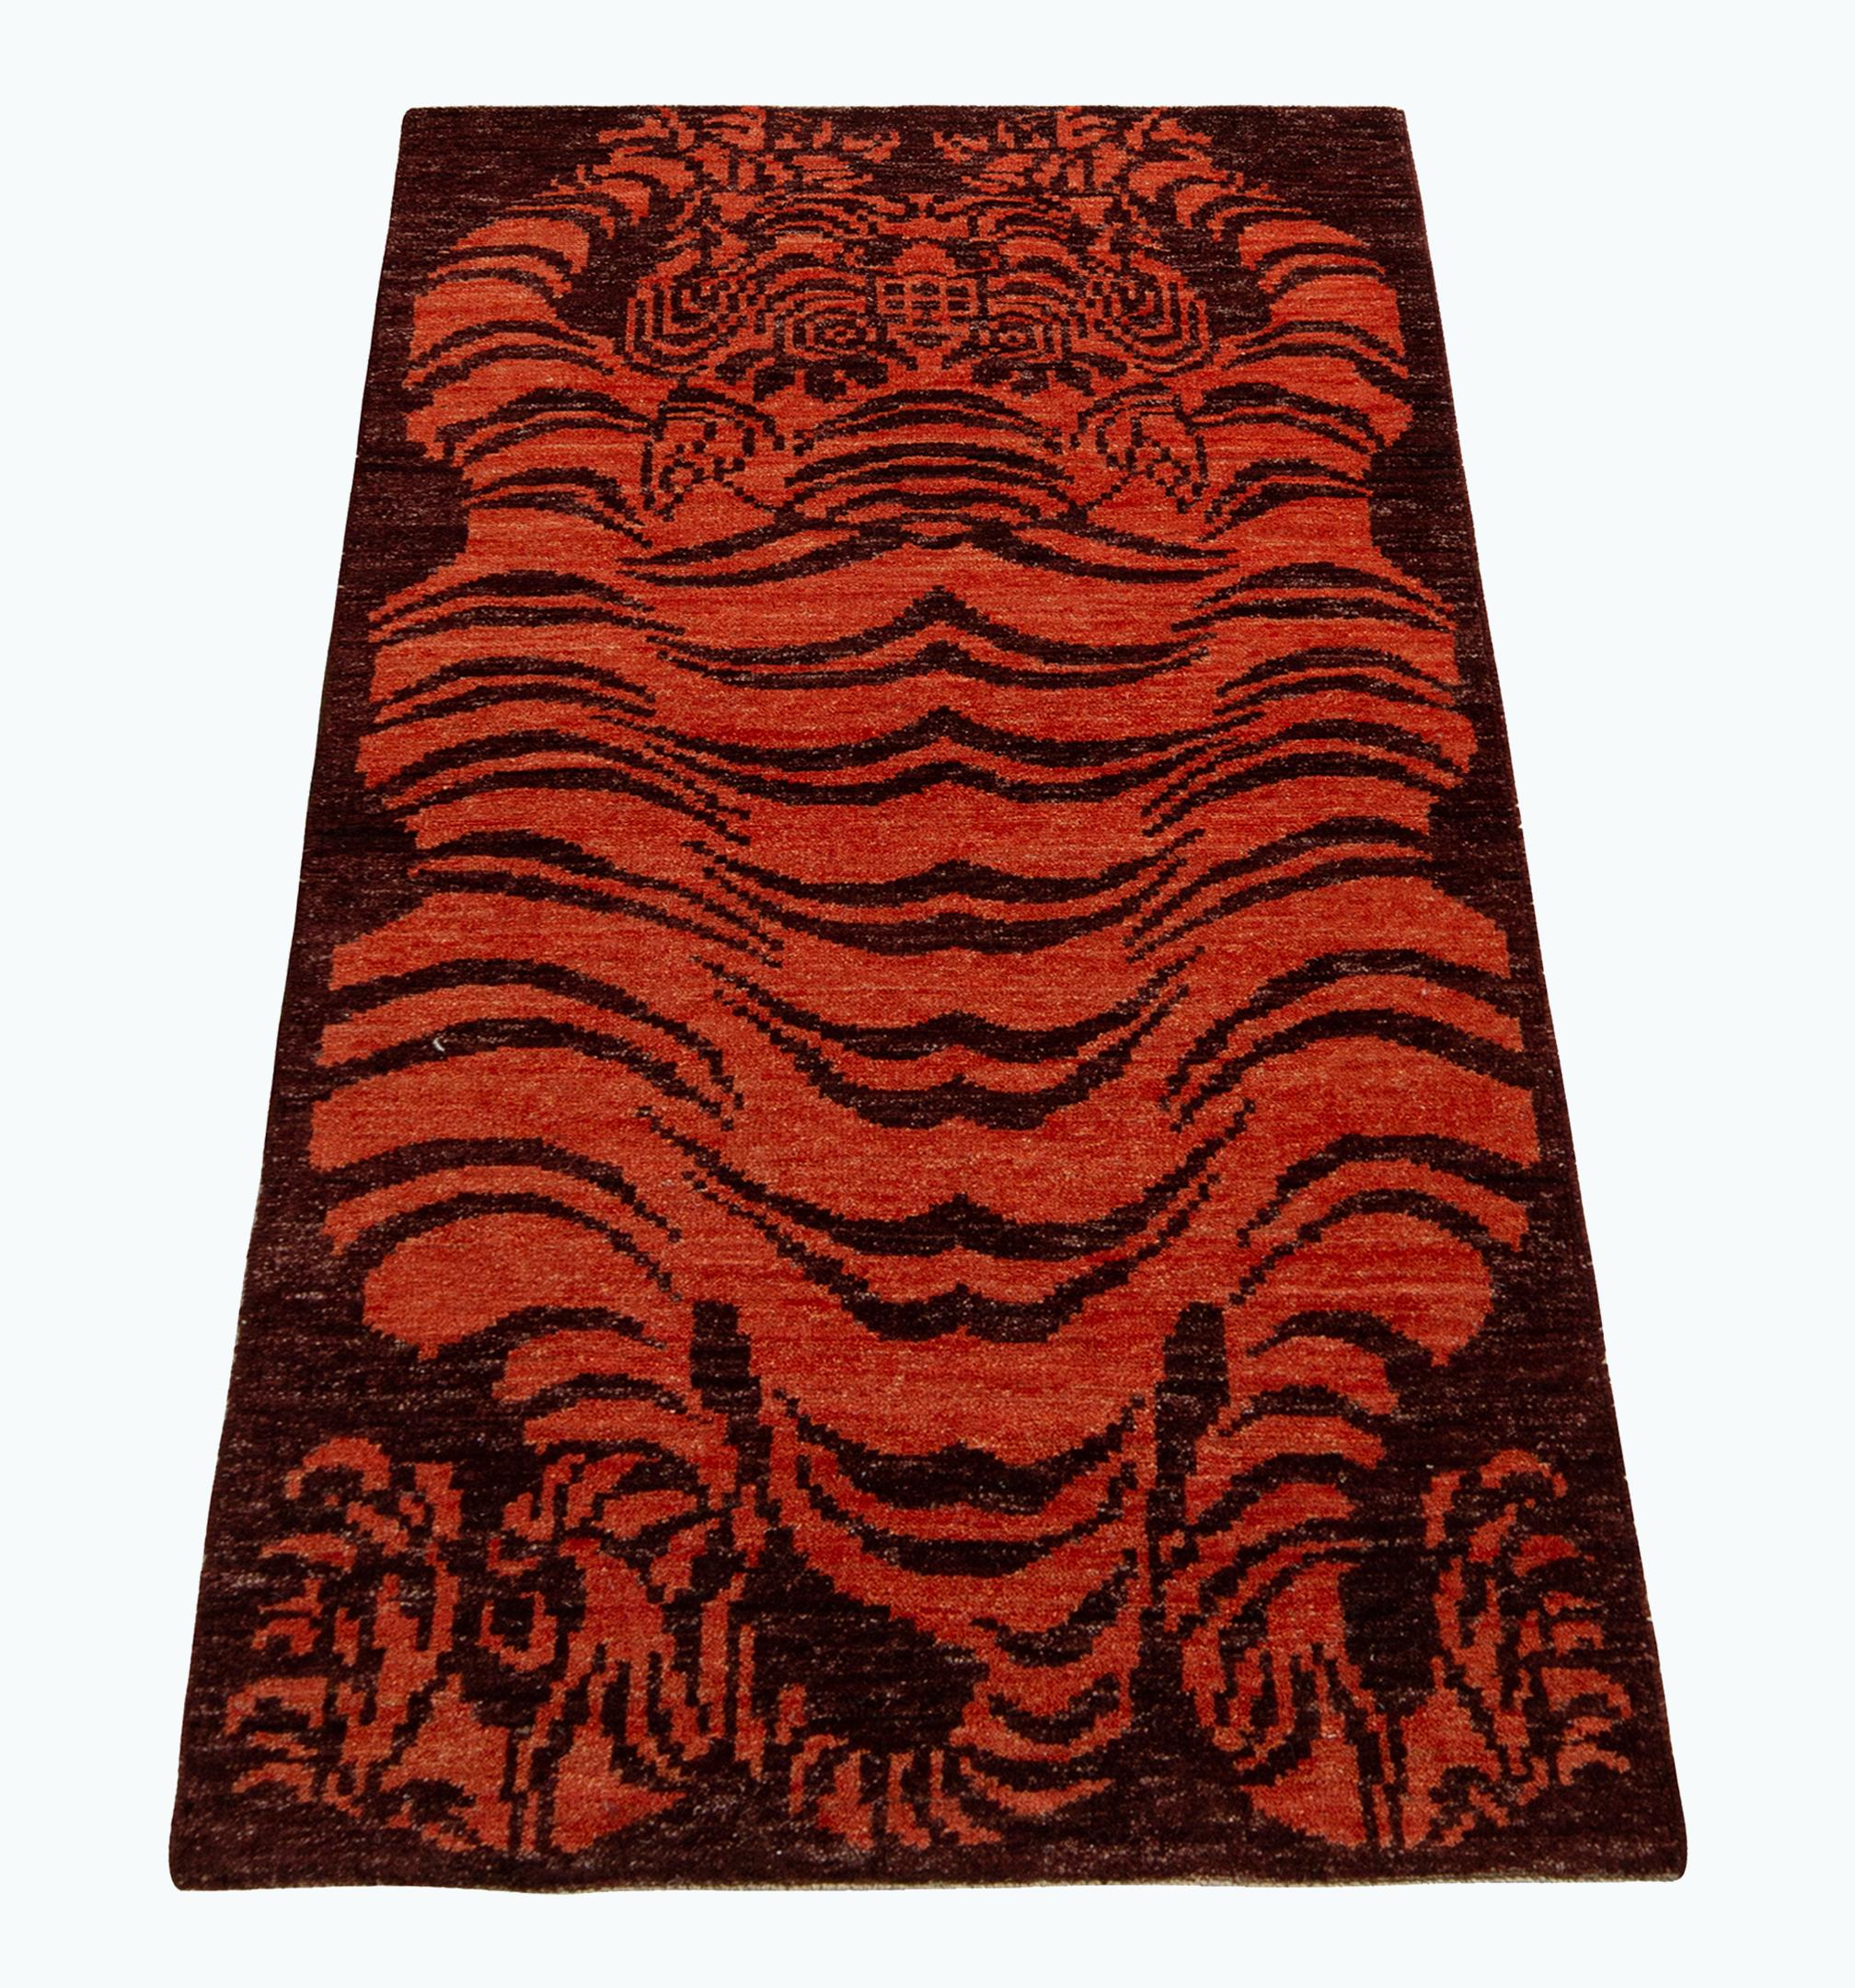 A 3x6 runner inspired by classic Tibetan Tiger rug styles, from the titular new collection by Rug & Kilim. Hand knotted in wool, enjoying rich, abrashed hues of orange against burgundy in a fierce and warm, curvaceous style. Exemplative in its